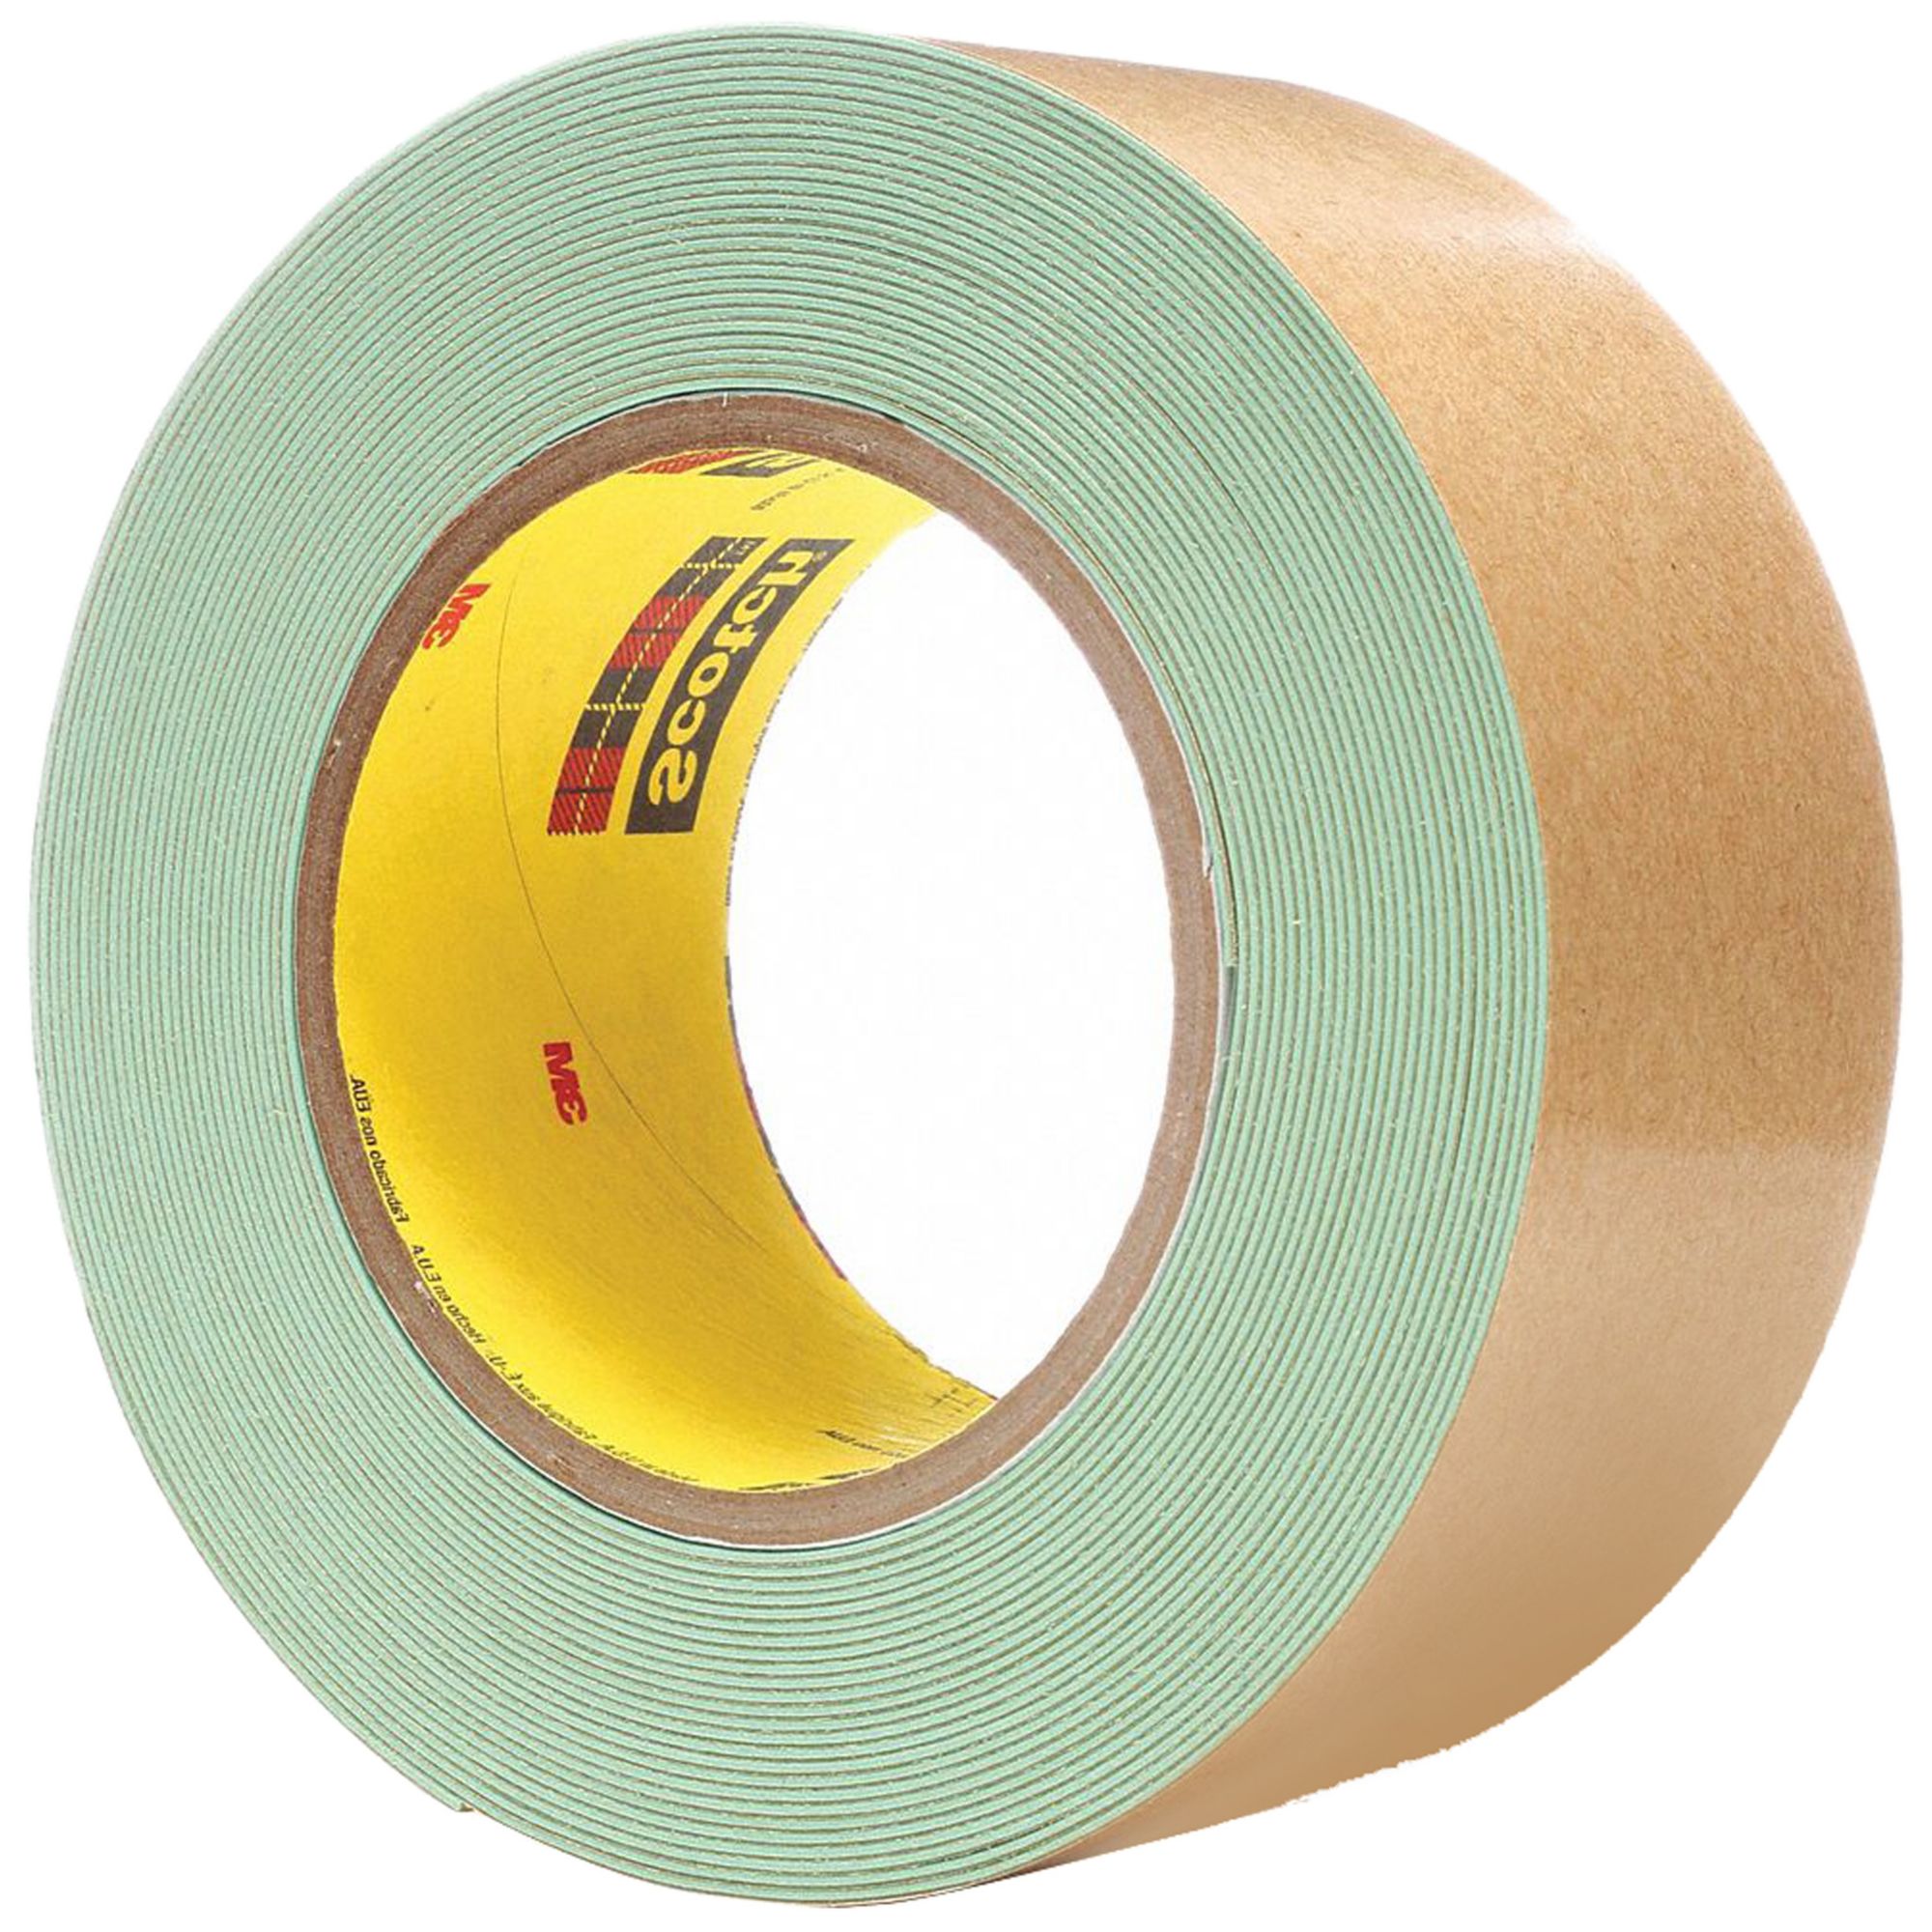 Scotch® ATG Adhesive Transfer Tape 969, Clear, 1/2 in x 36 yd, 5 mil - The  Binding Source